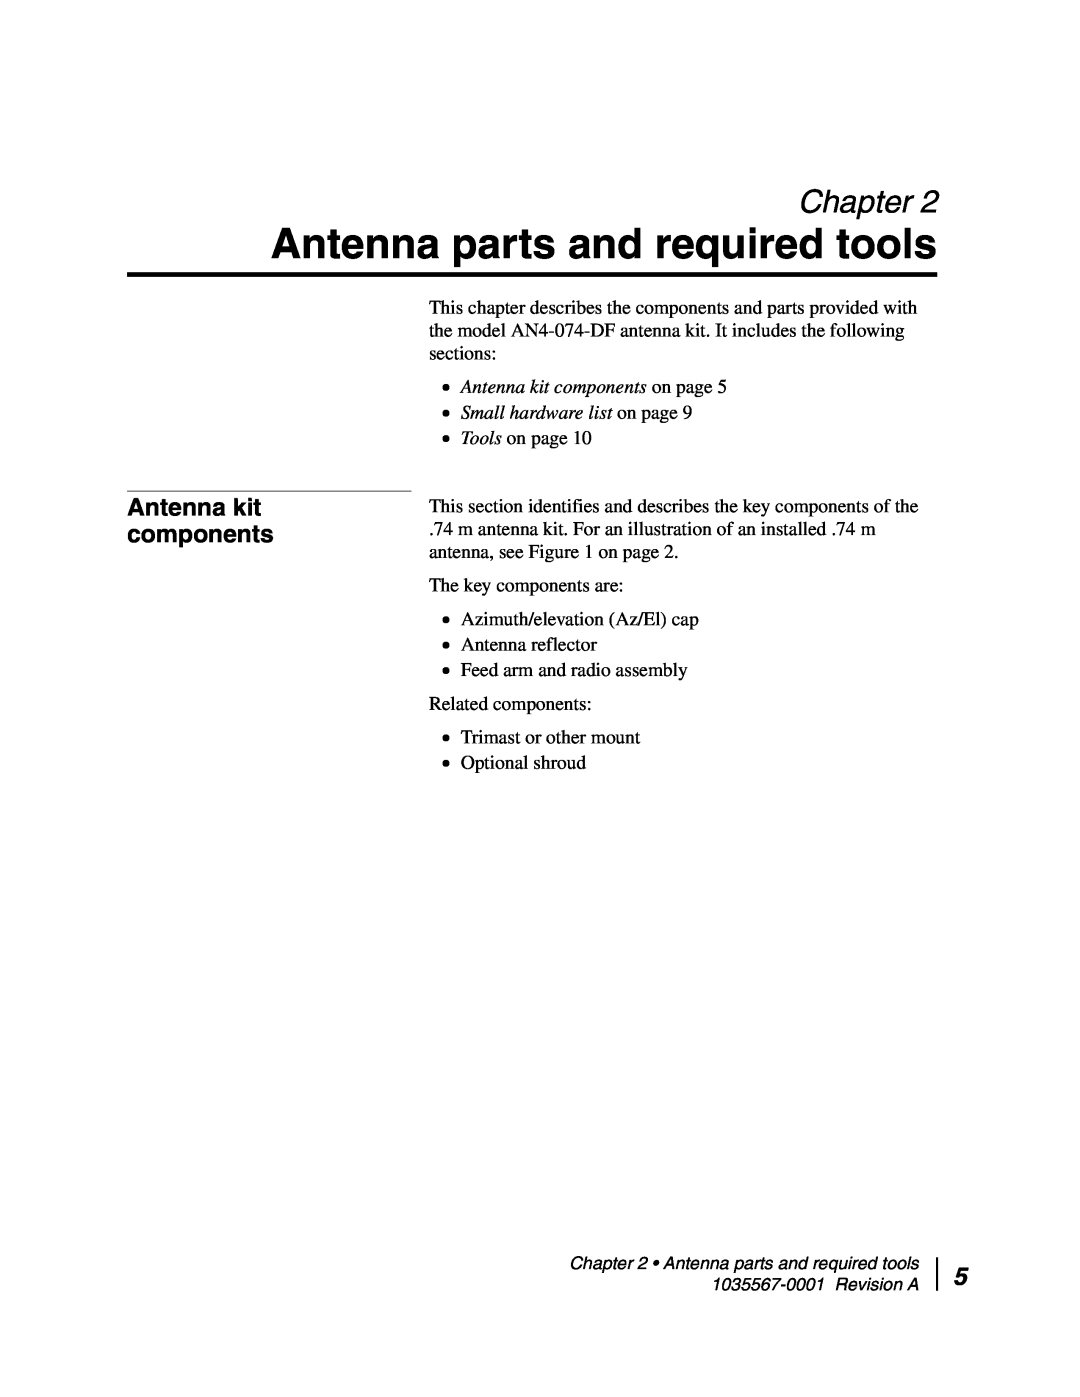 Hughes AN4-074-DF installation manual Antenna parts and required tools, Chapter, Antenna kit components on page 